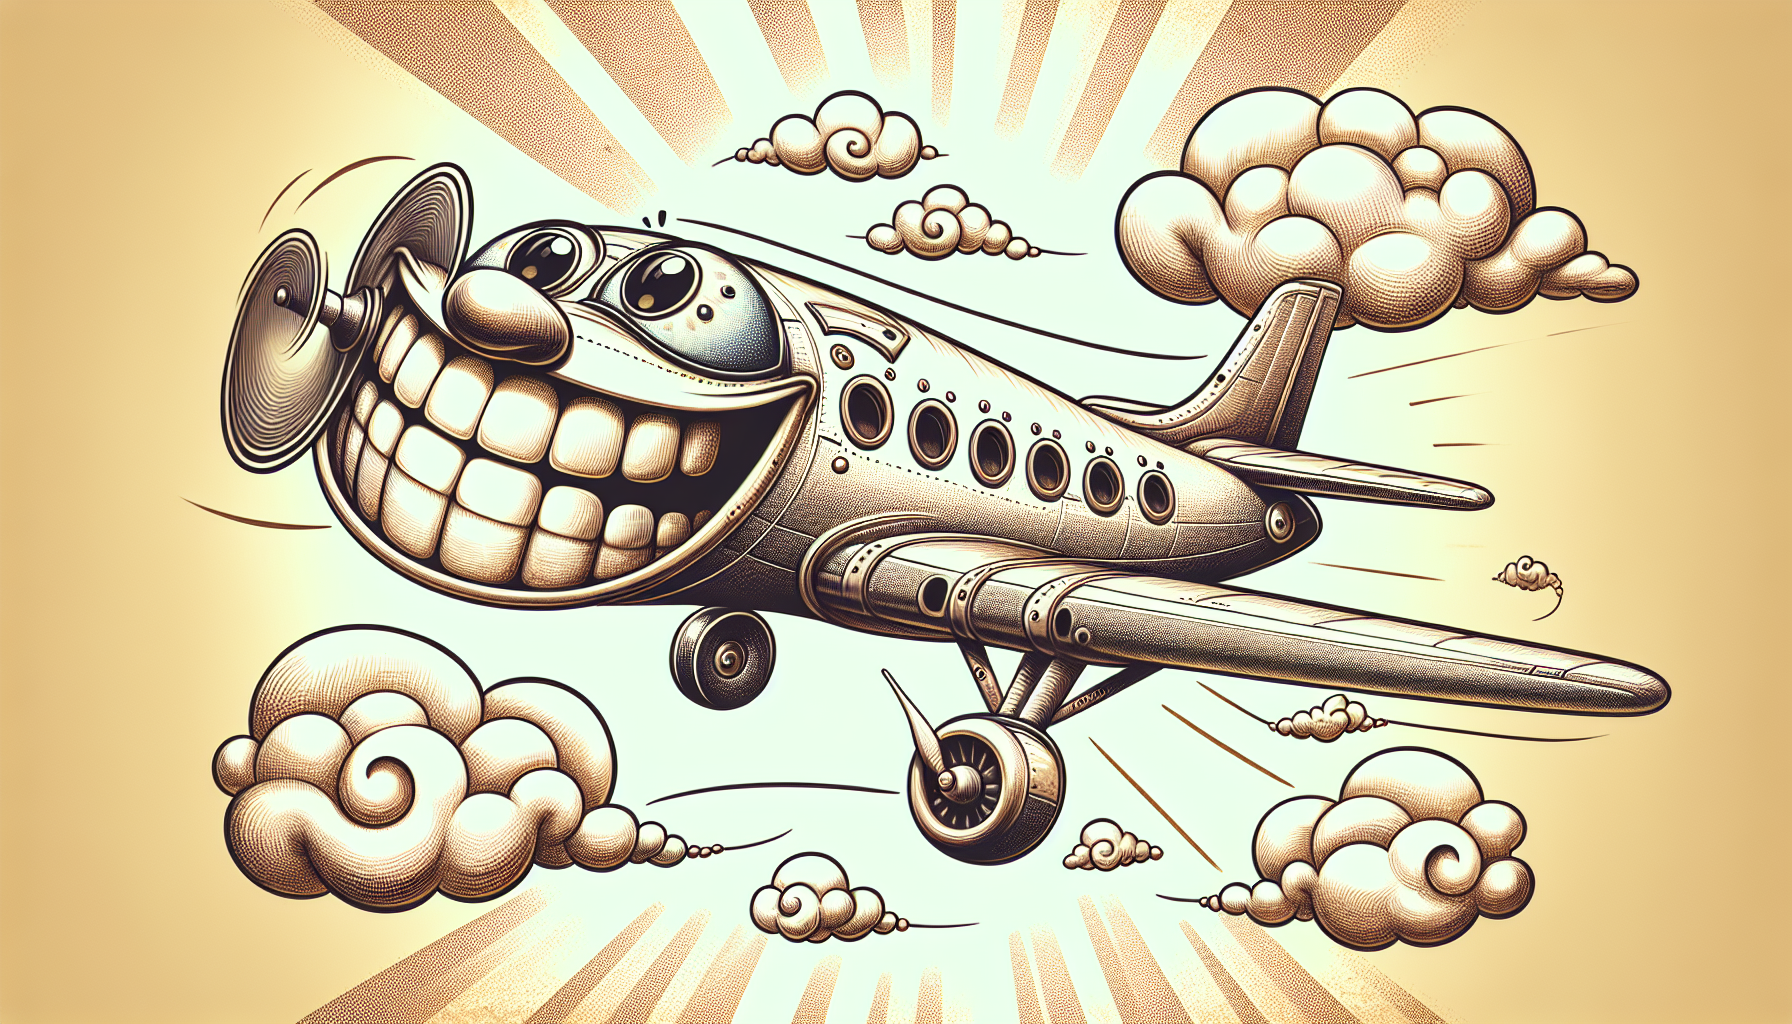 A playful illustration of a cheesy airplane with a smiling face and wings, representing a cheesy airplane pun